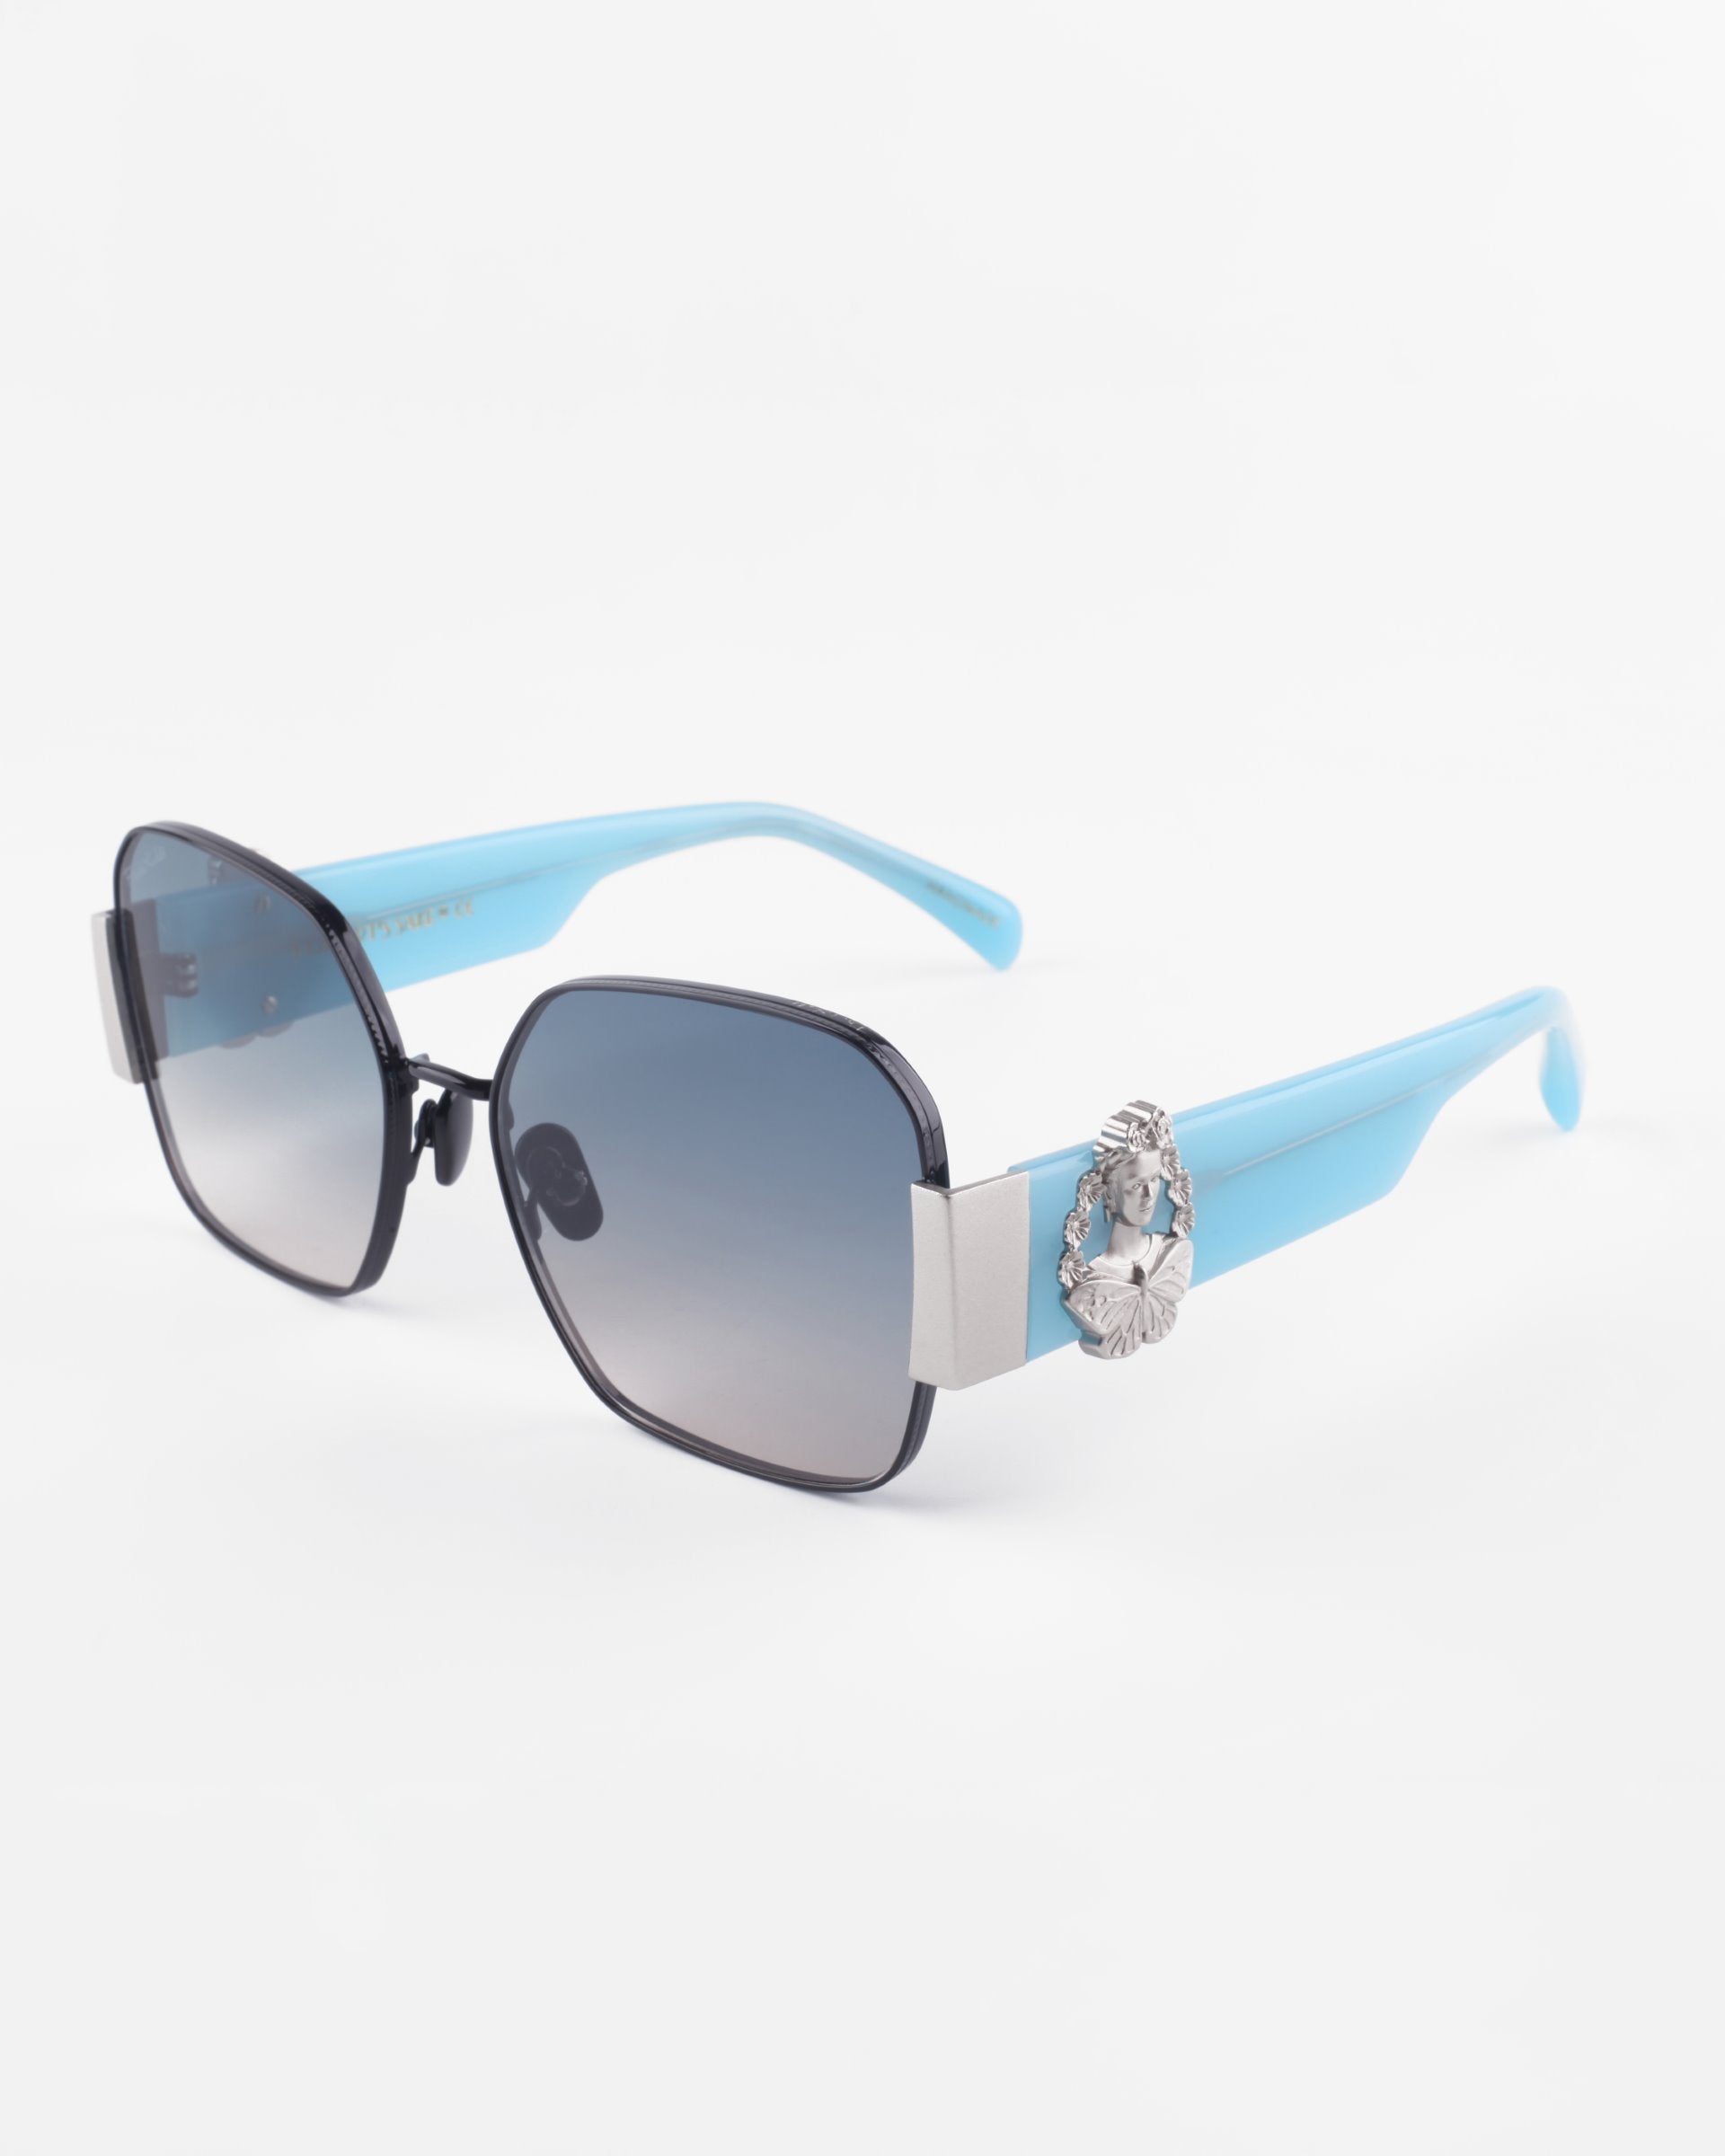 Introducing the Frida Mask by For Art's Sake®: A pair of rectangular sunglasses featuring black frames and light blue temples. The temples have a silver decorative element with a circular emblem near the hinge. The ultra-lightweight Nylon lenses offer gradient shading, transitioning from dark at the top to lighter at the bottom, with 100% UVA & UVB protection.